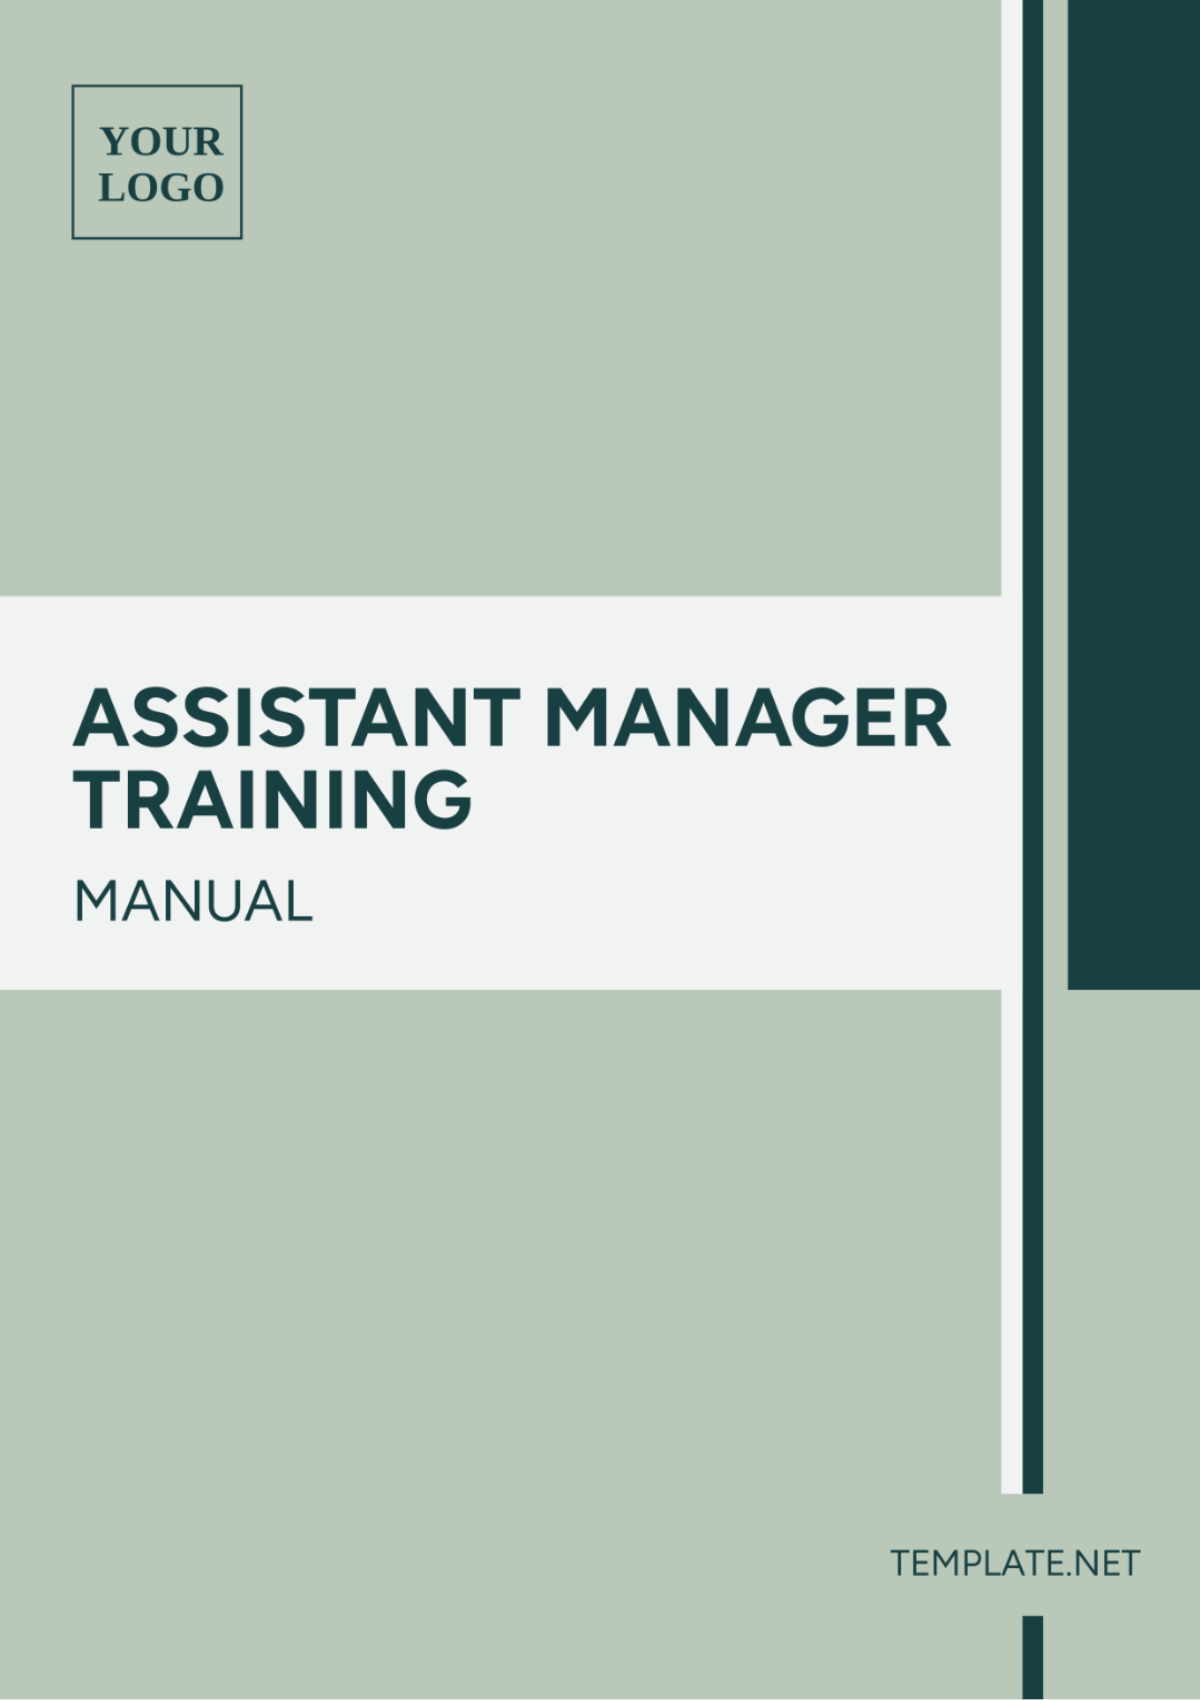 Assistant Manager Training Manual Template